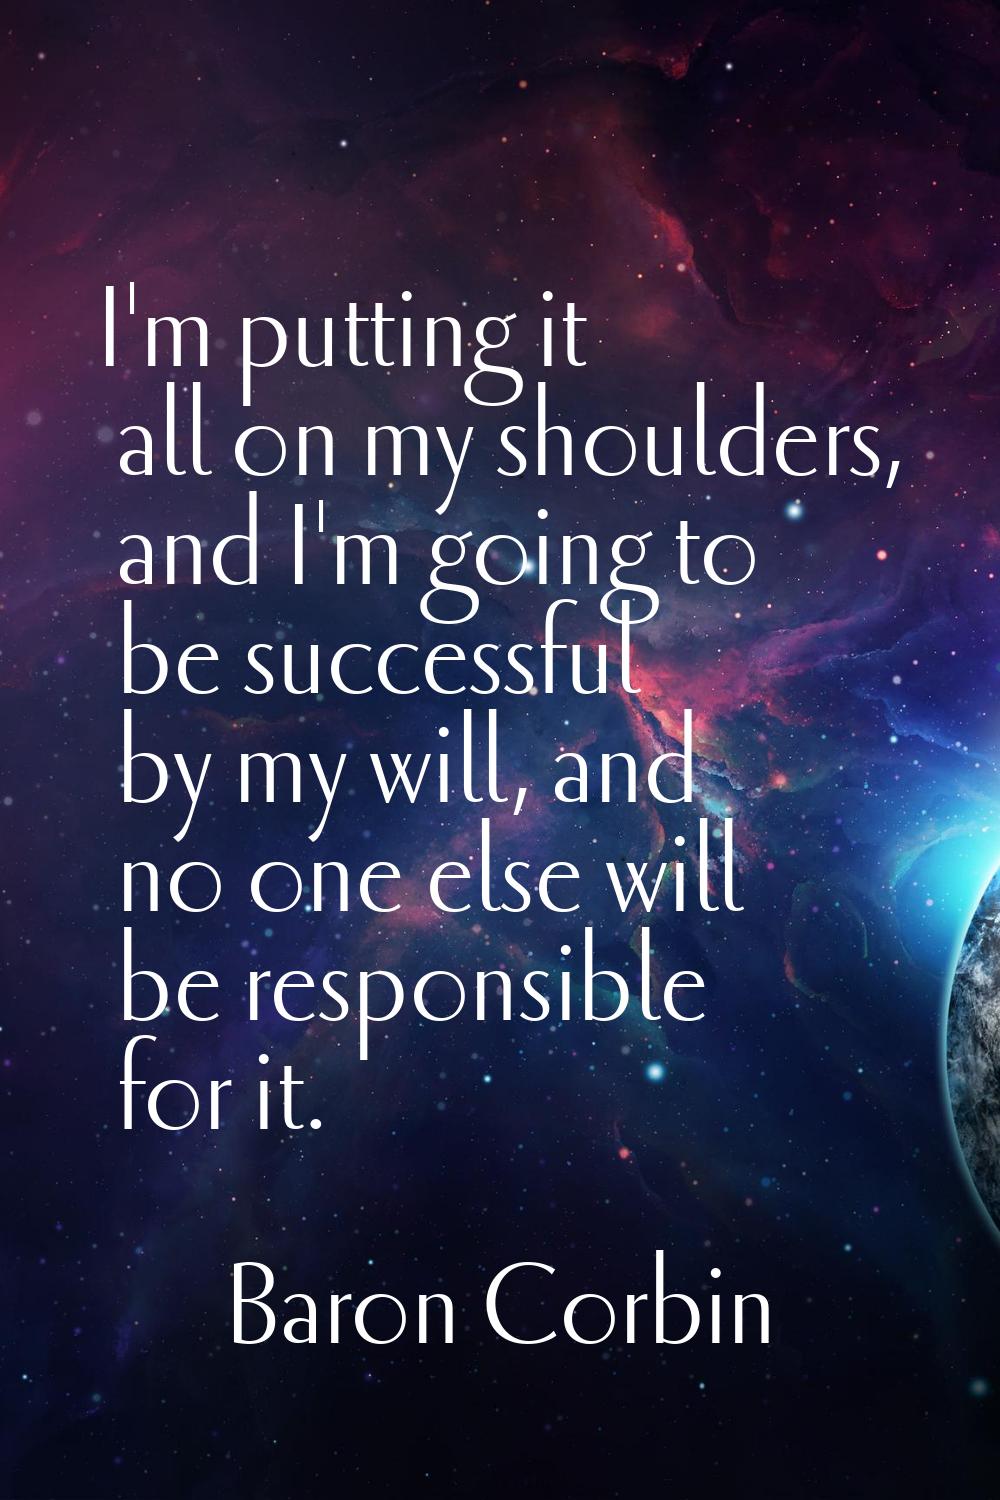 I'm putting it all on my shoulders, and I'm going to be successful by my will, and no one else will